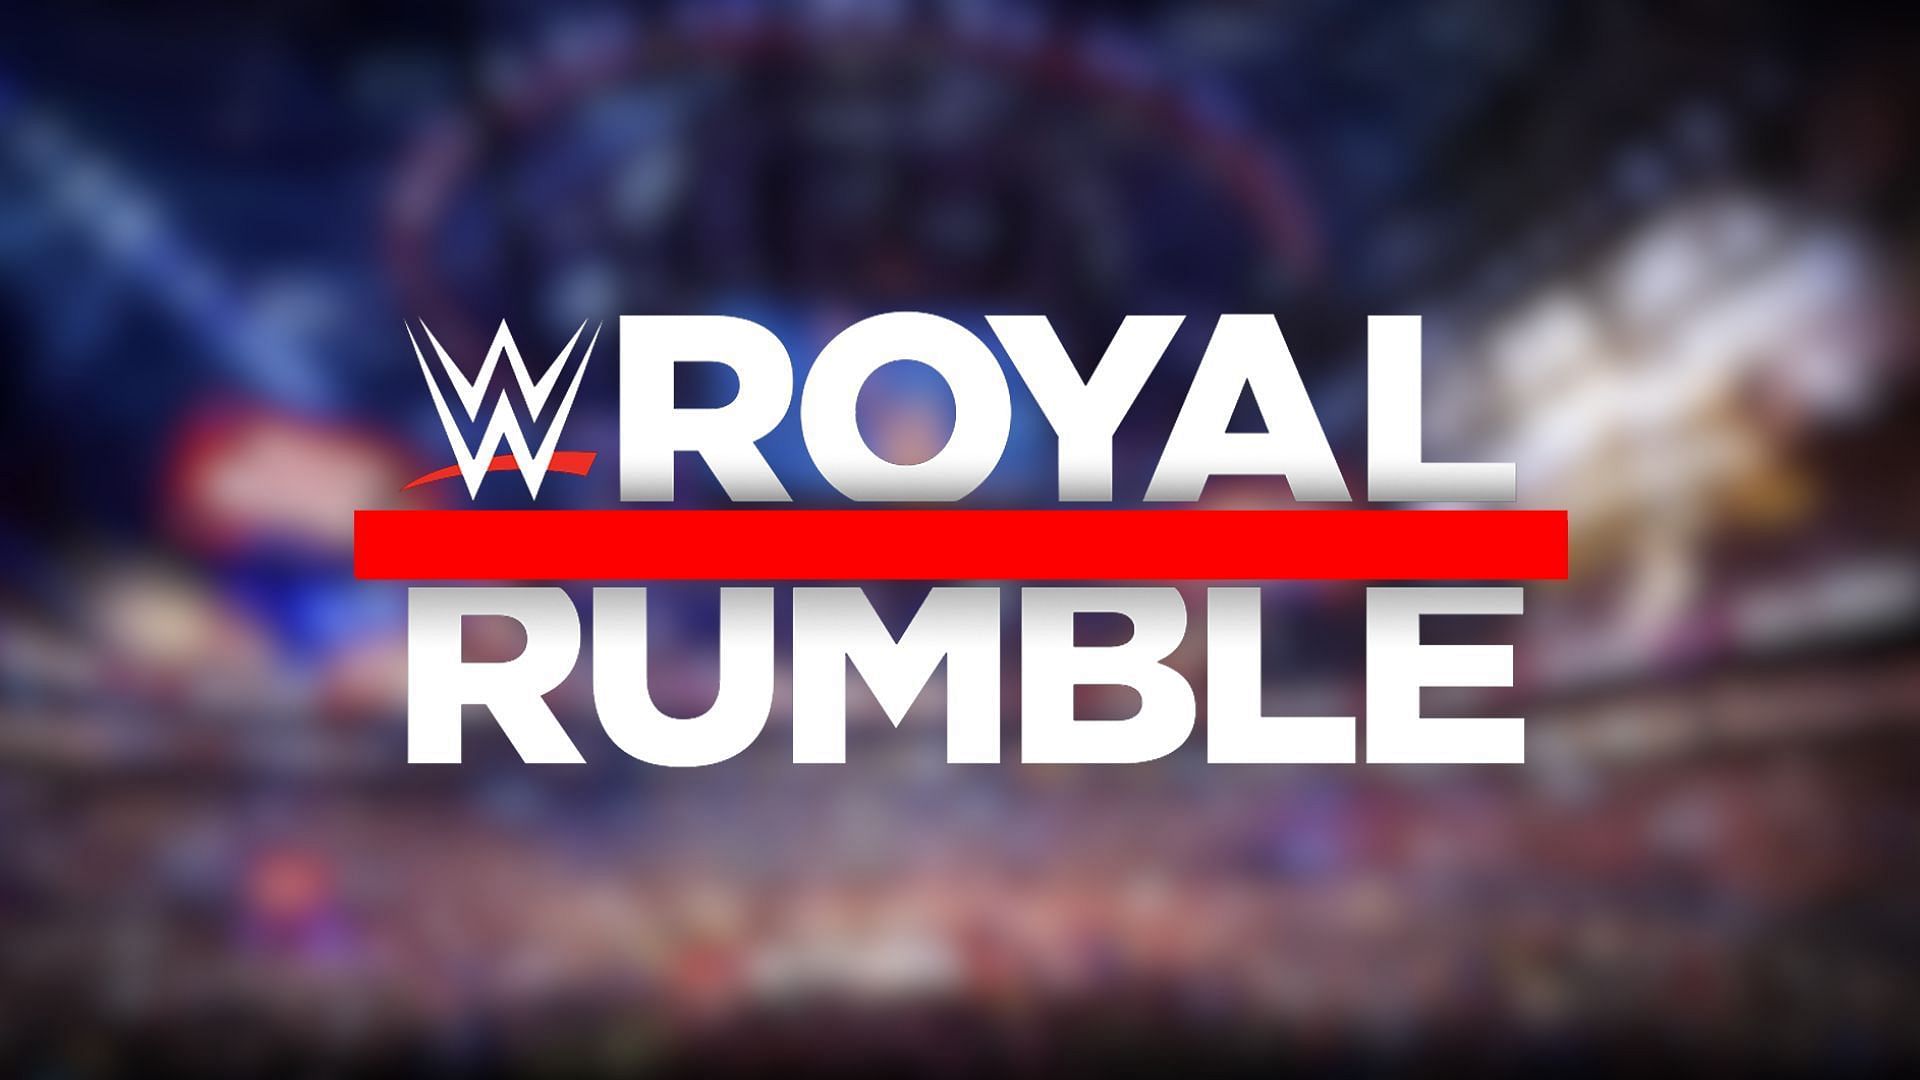 The Royal Rumble 2023 event took place in the Alamodome in San Antonio, Texas.